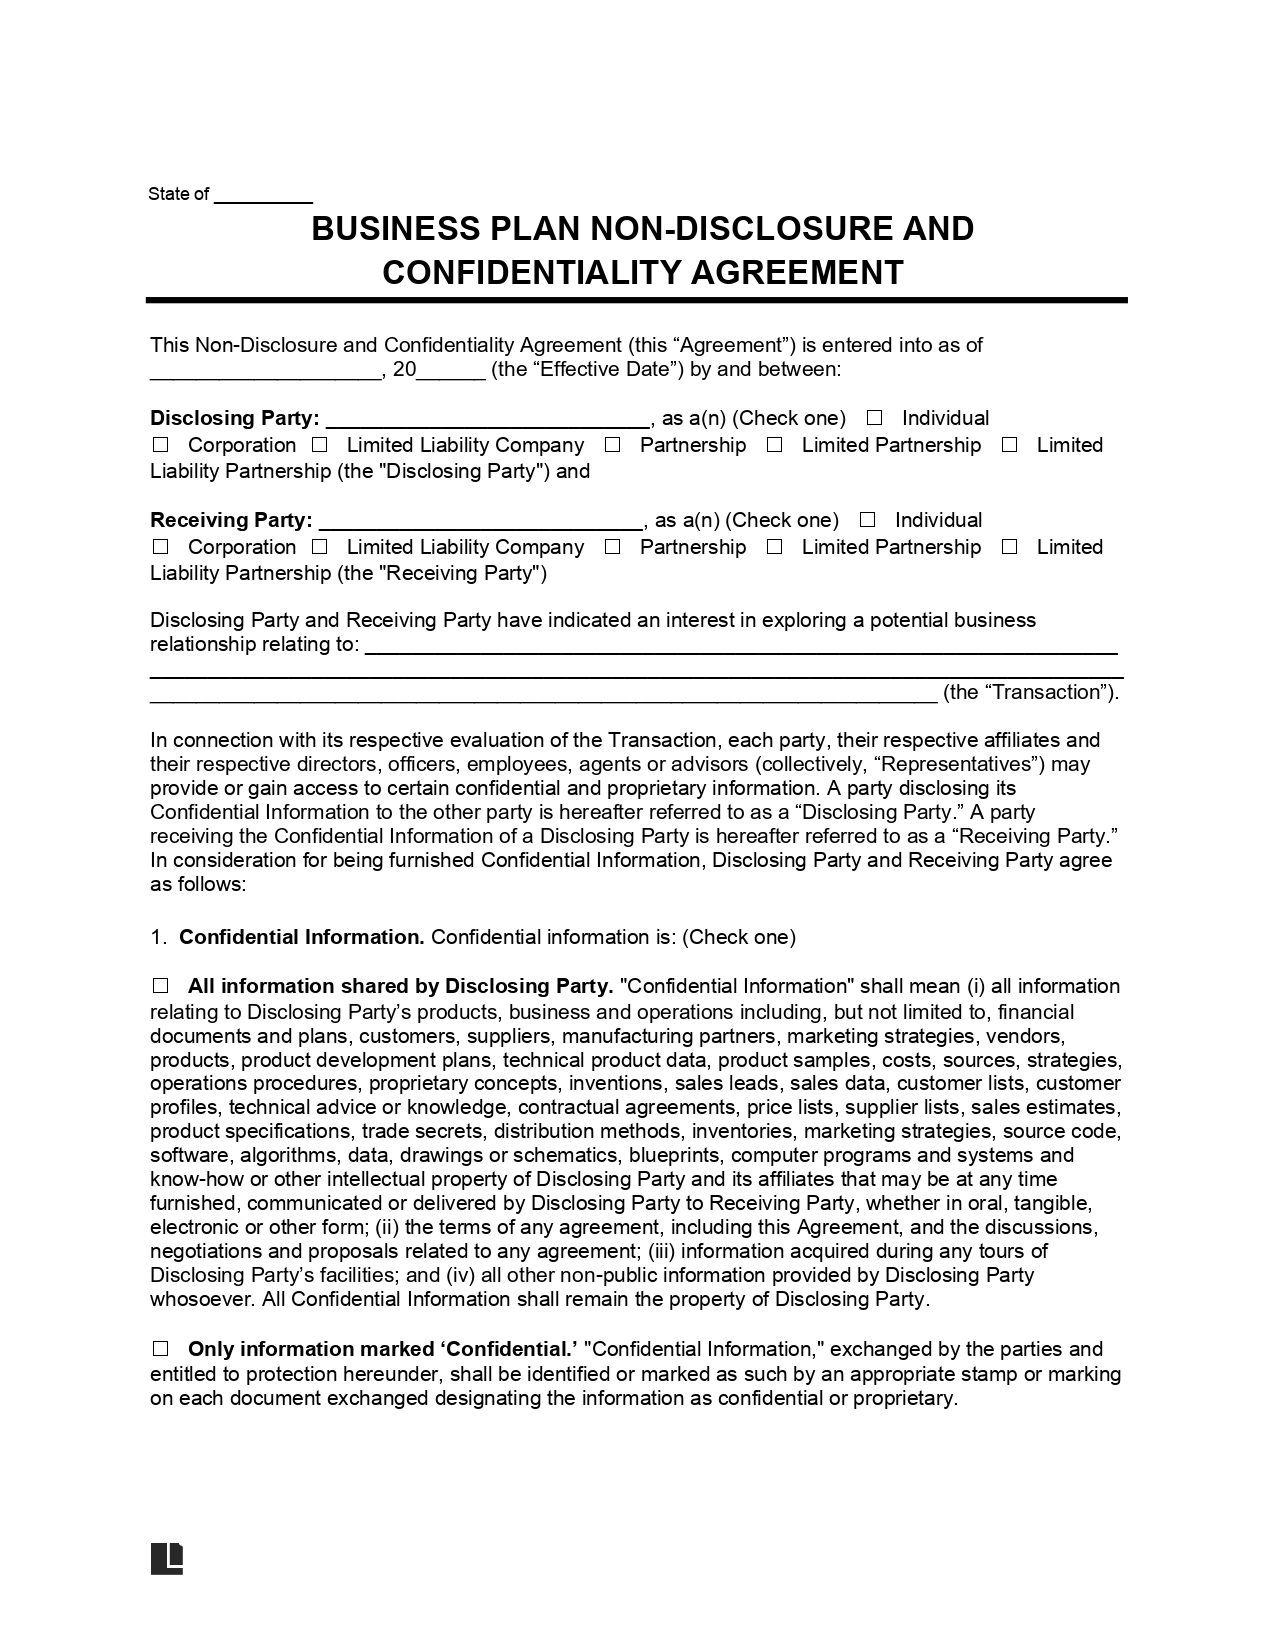 Business Plan Non-Disclosure and Confidentiality Agreement